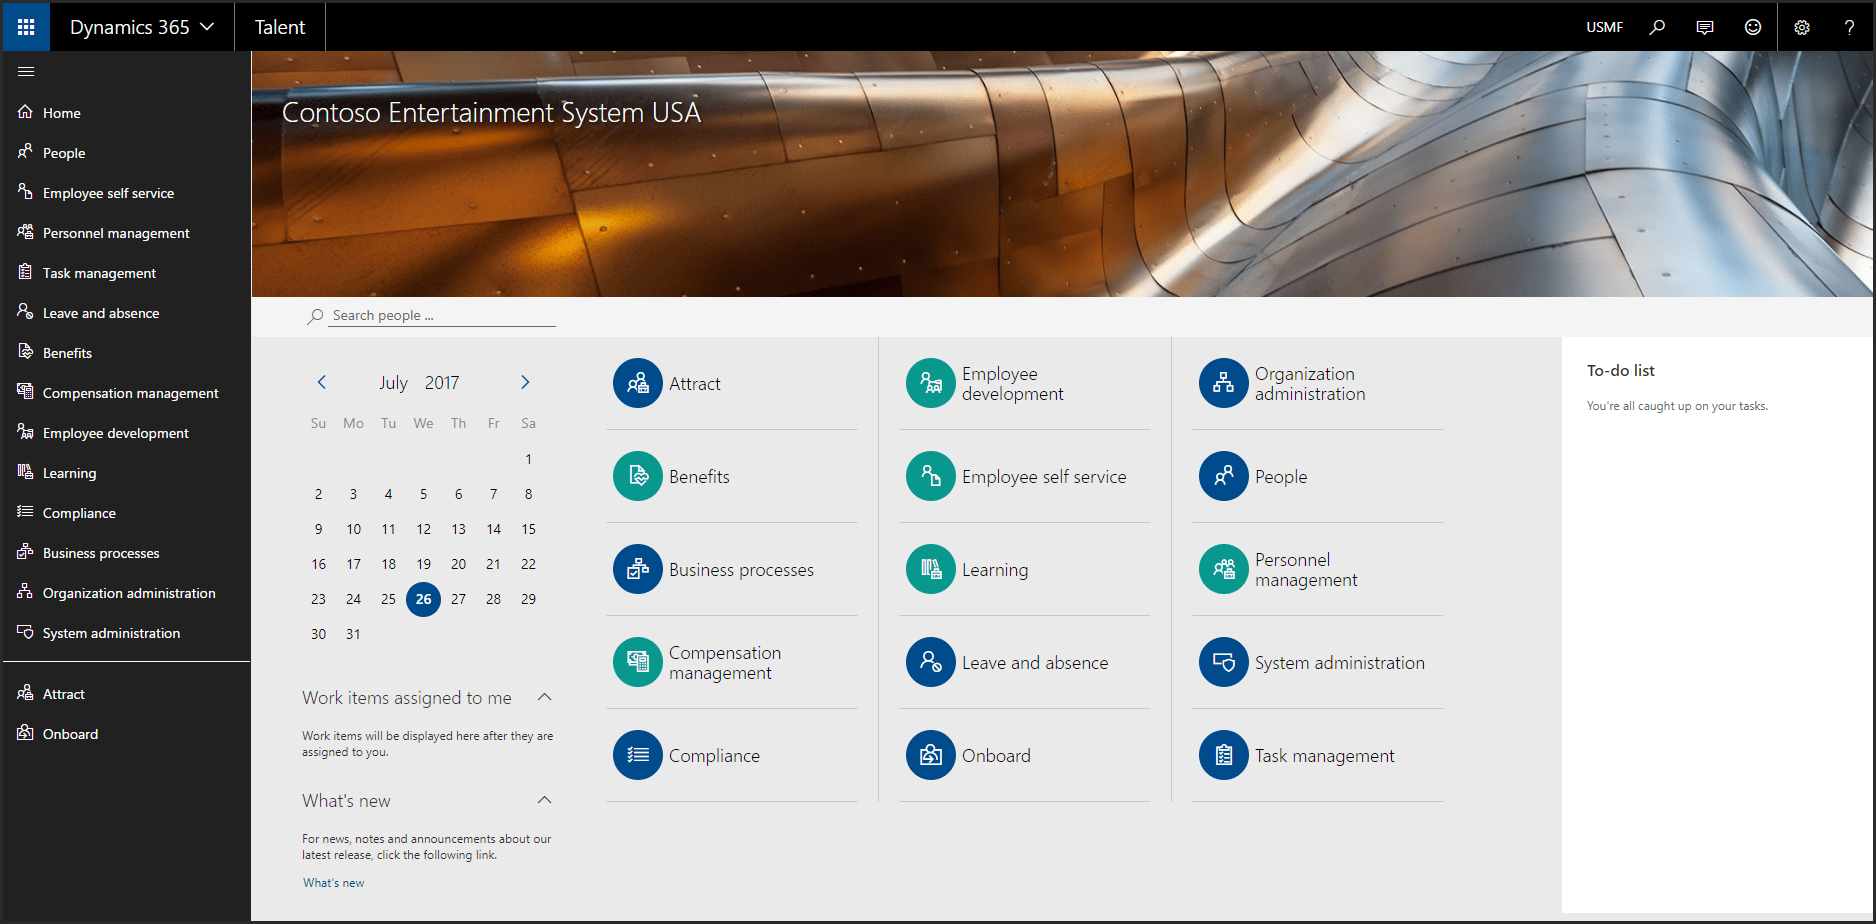 Dynamics 365 for Talent home screen